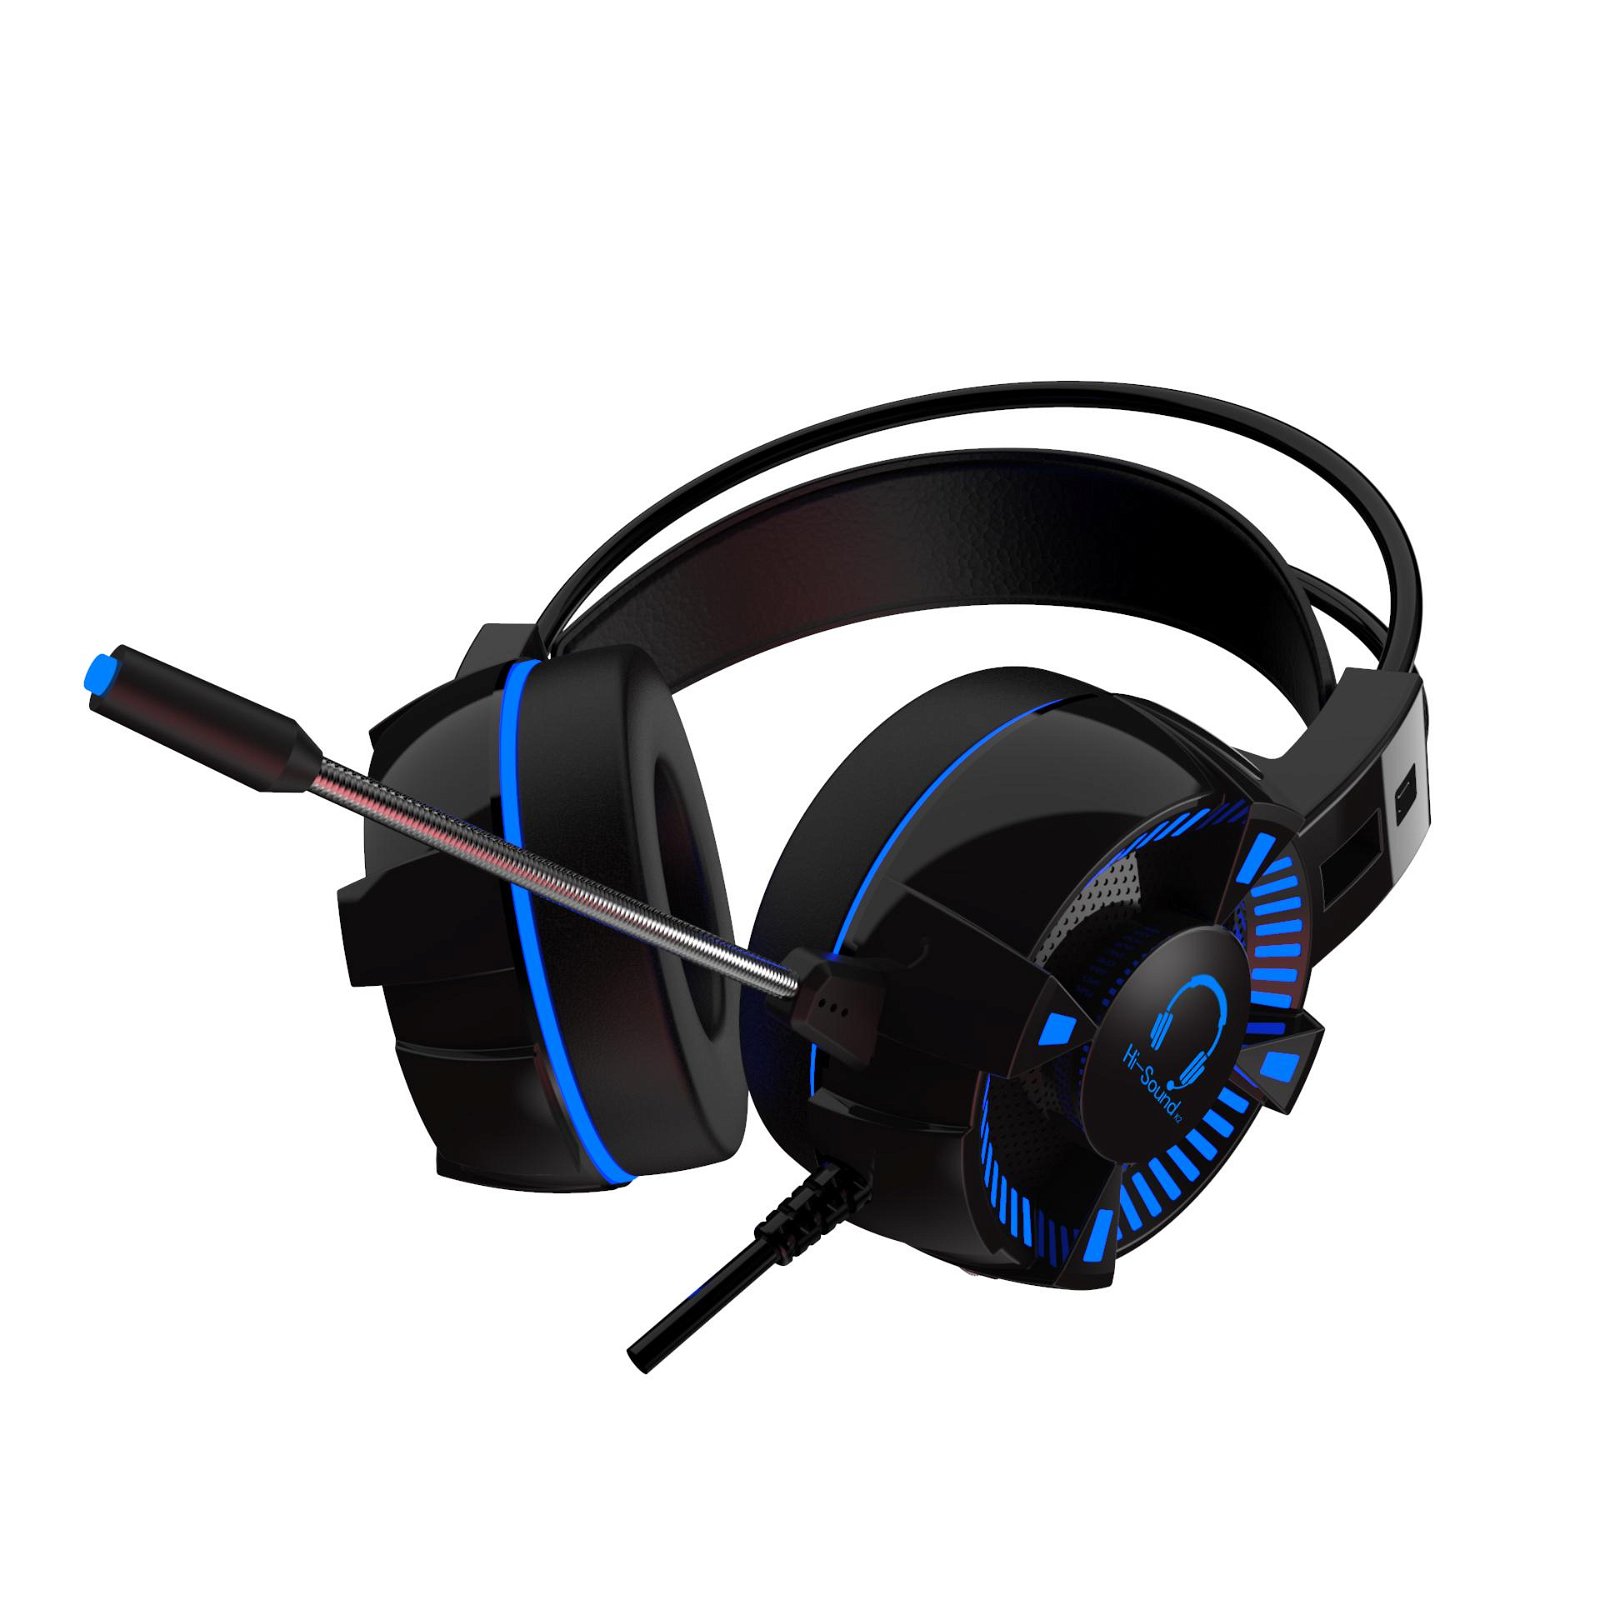 Hi-sound LED Cool Colorful LED Gaming Headset for gamers 4